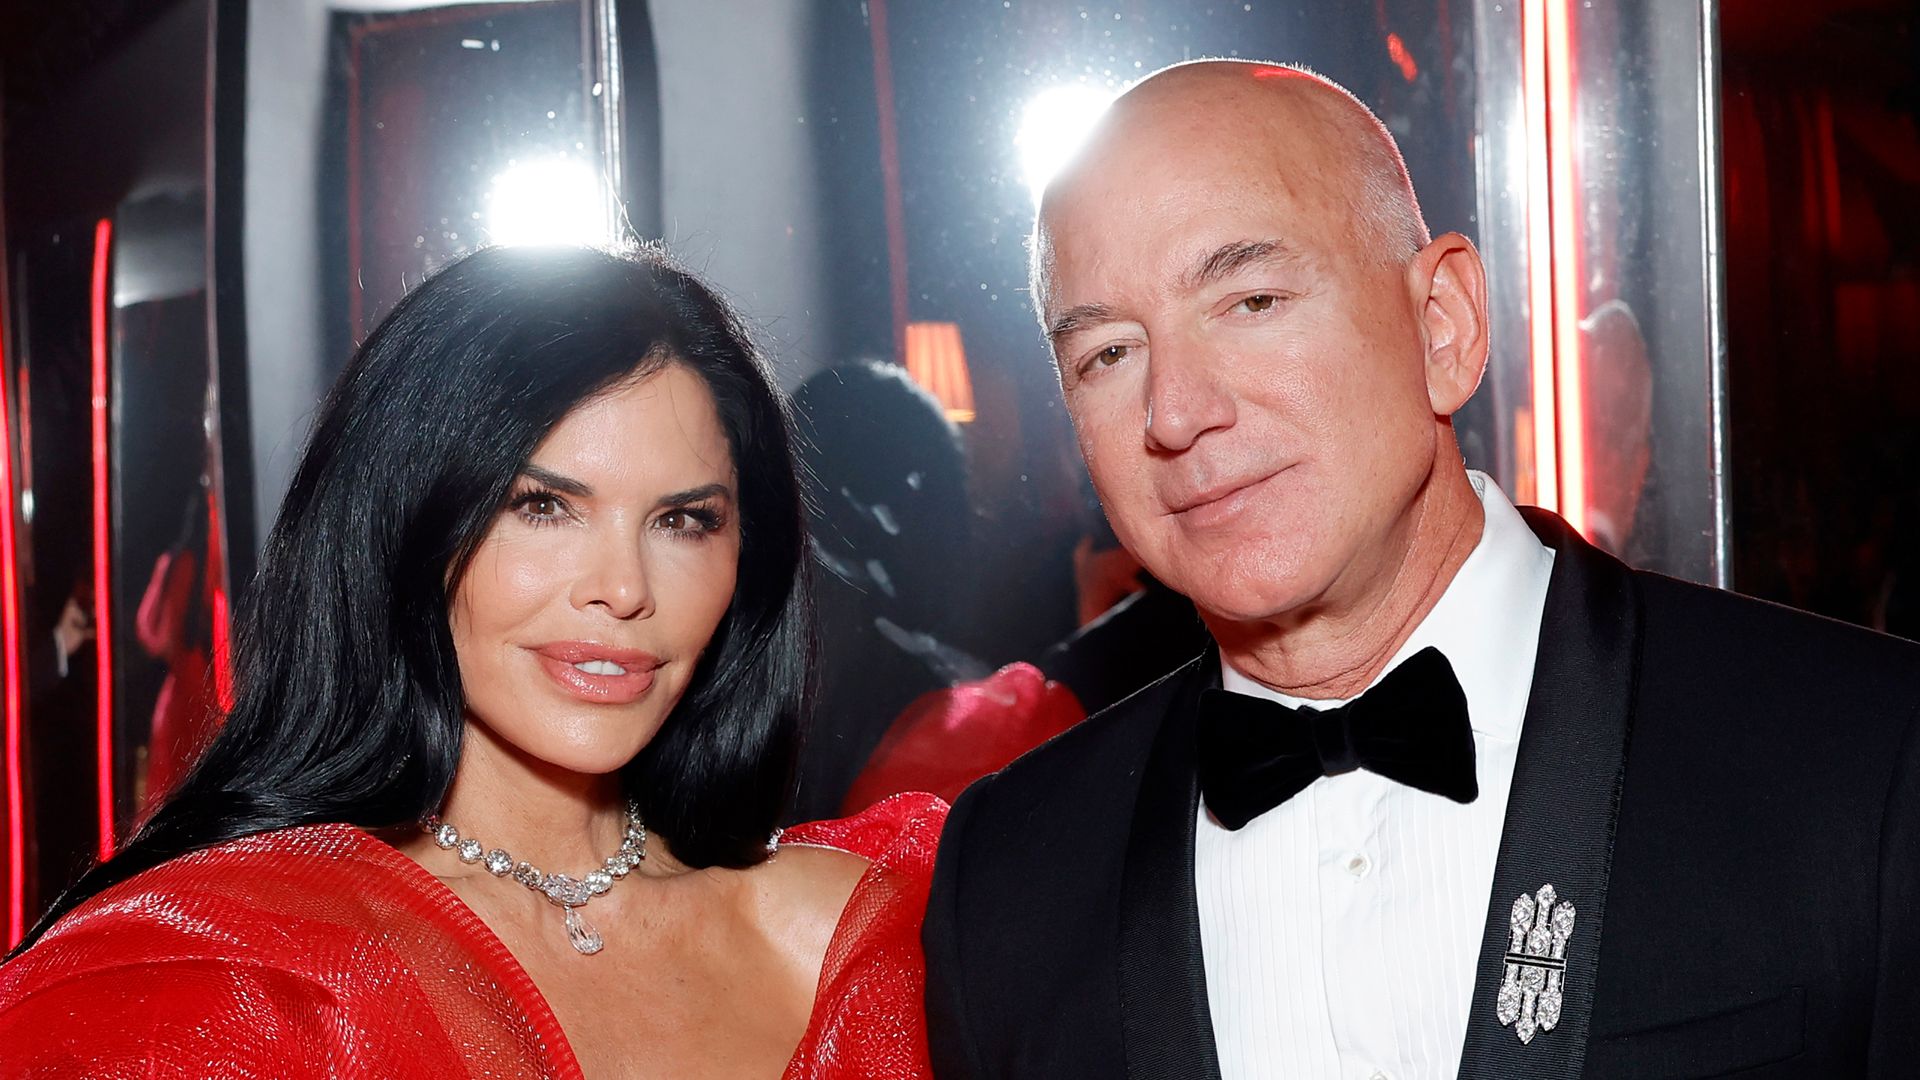 Lauren Sanchez reflects on emotional weekend with fiancé Jeff Bezos and their $100 million move